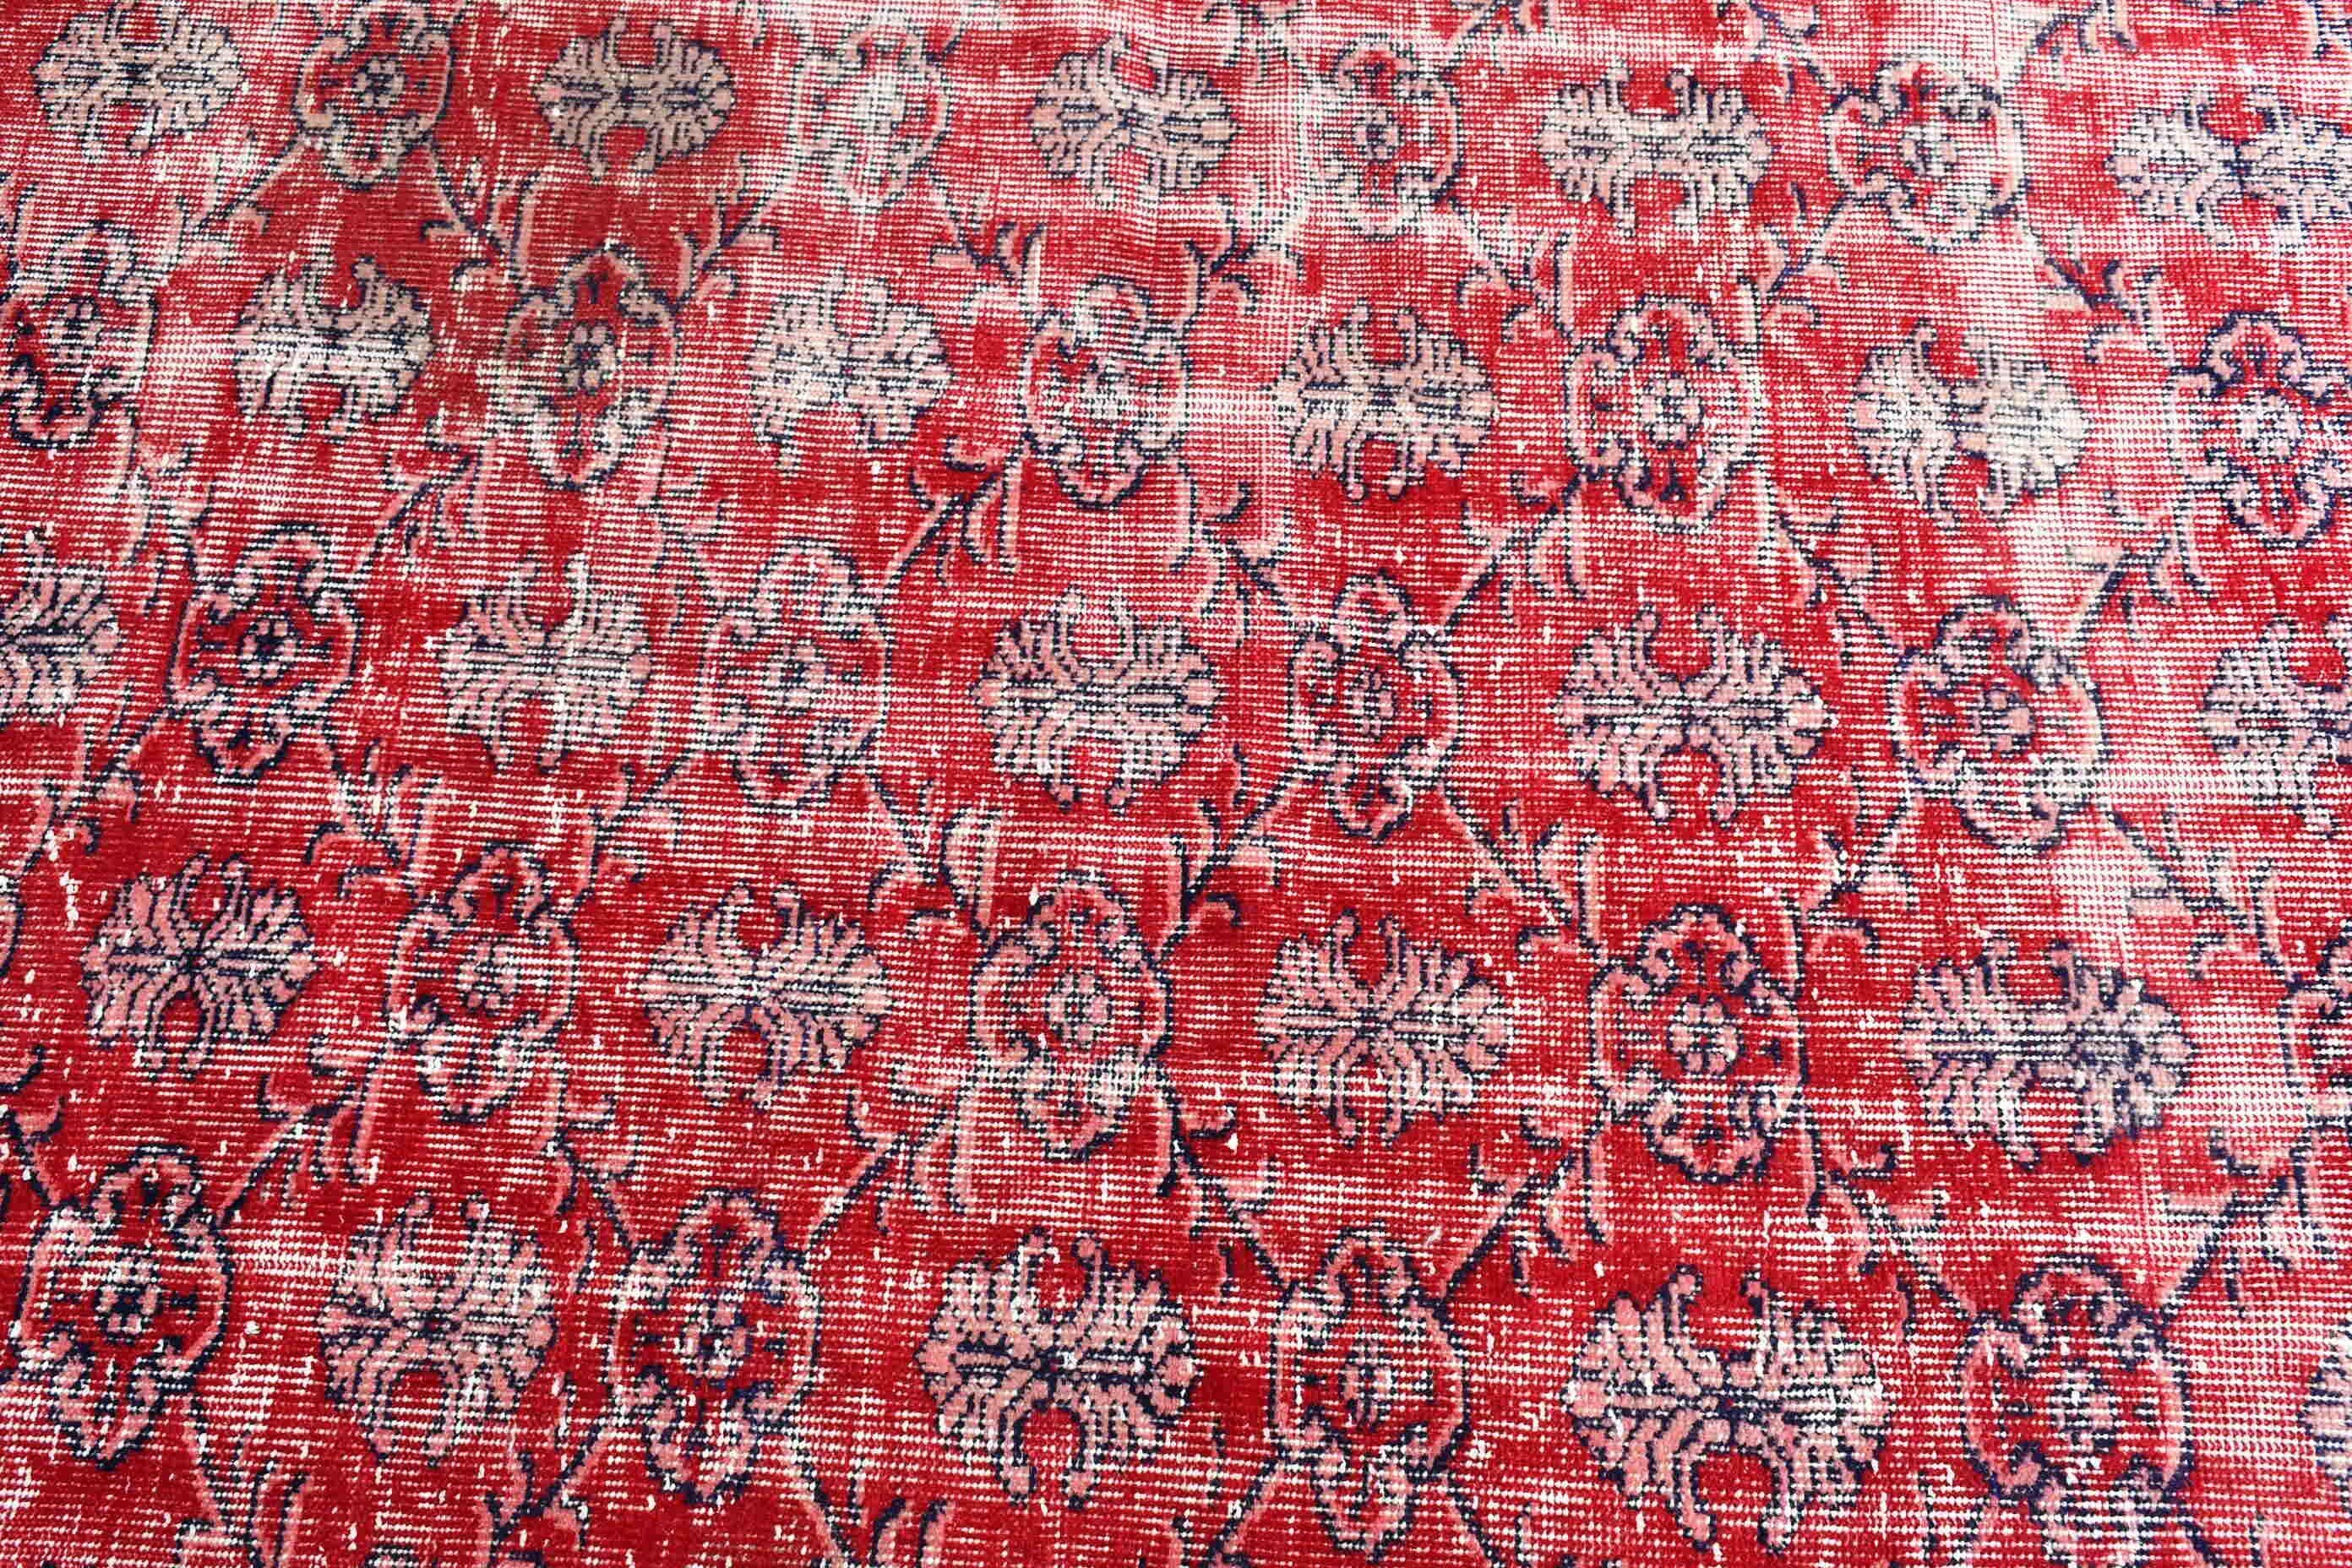 Turkish Rug, Vintage Rugs, Oriental Rug, Rugs for Nursery, Kitchen Rugs, Nursery Rug, Red Oriental Rugs, Entry Rug, 3.6x4.9 ft Accent Rug